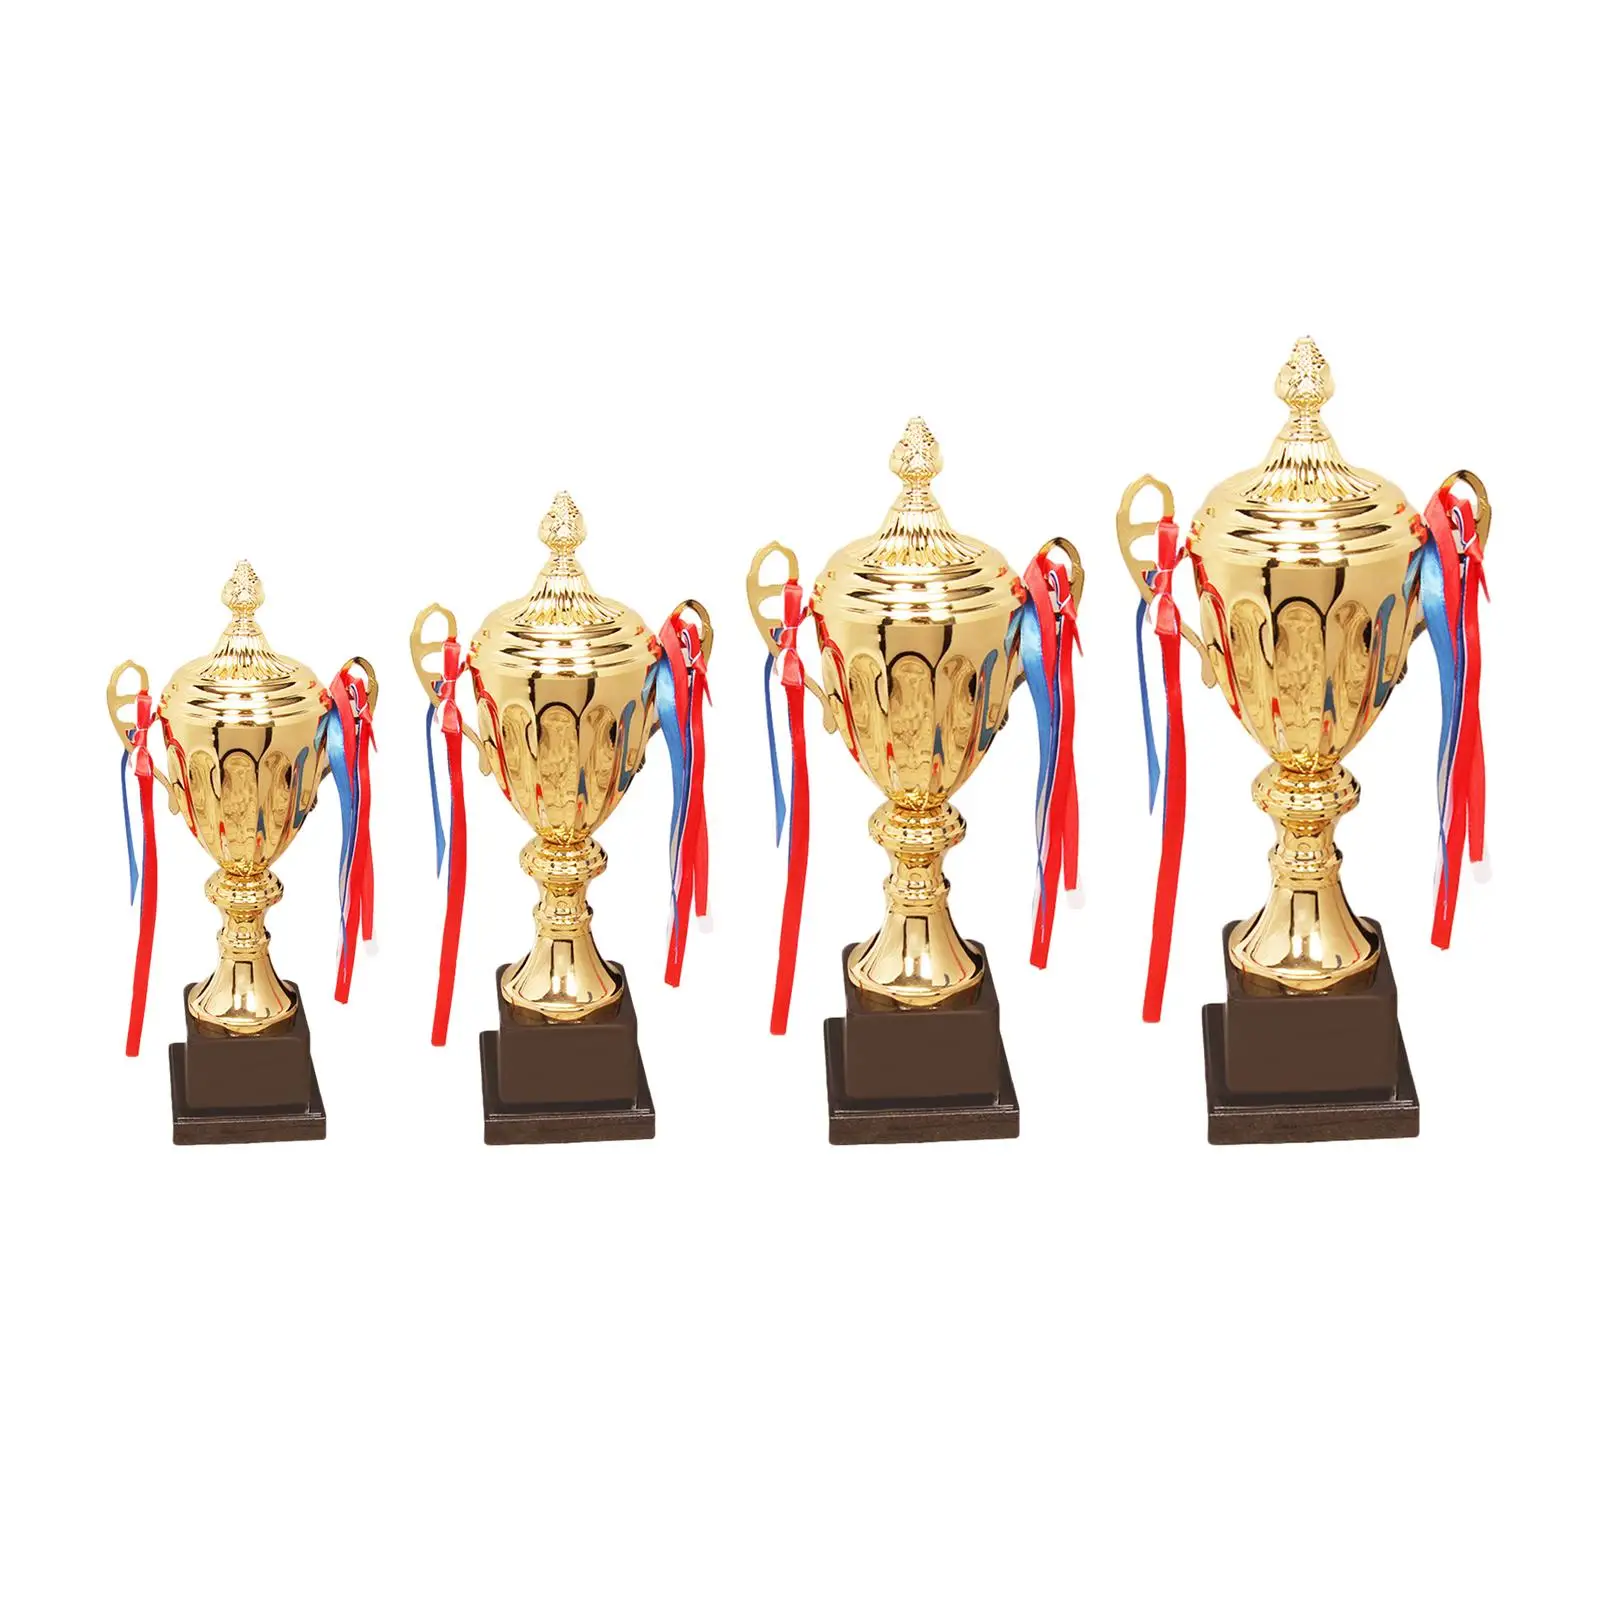 Award Trophy Competitions Winning Reward Prize Trophy Cup for Celebrations Championships Baseball Competition Decorations